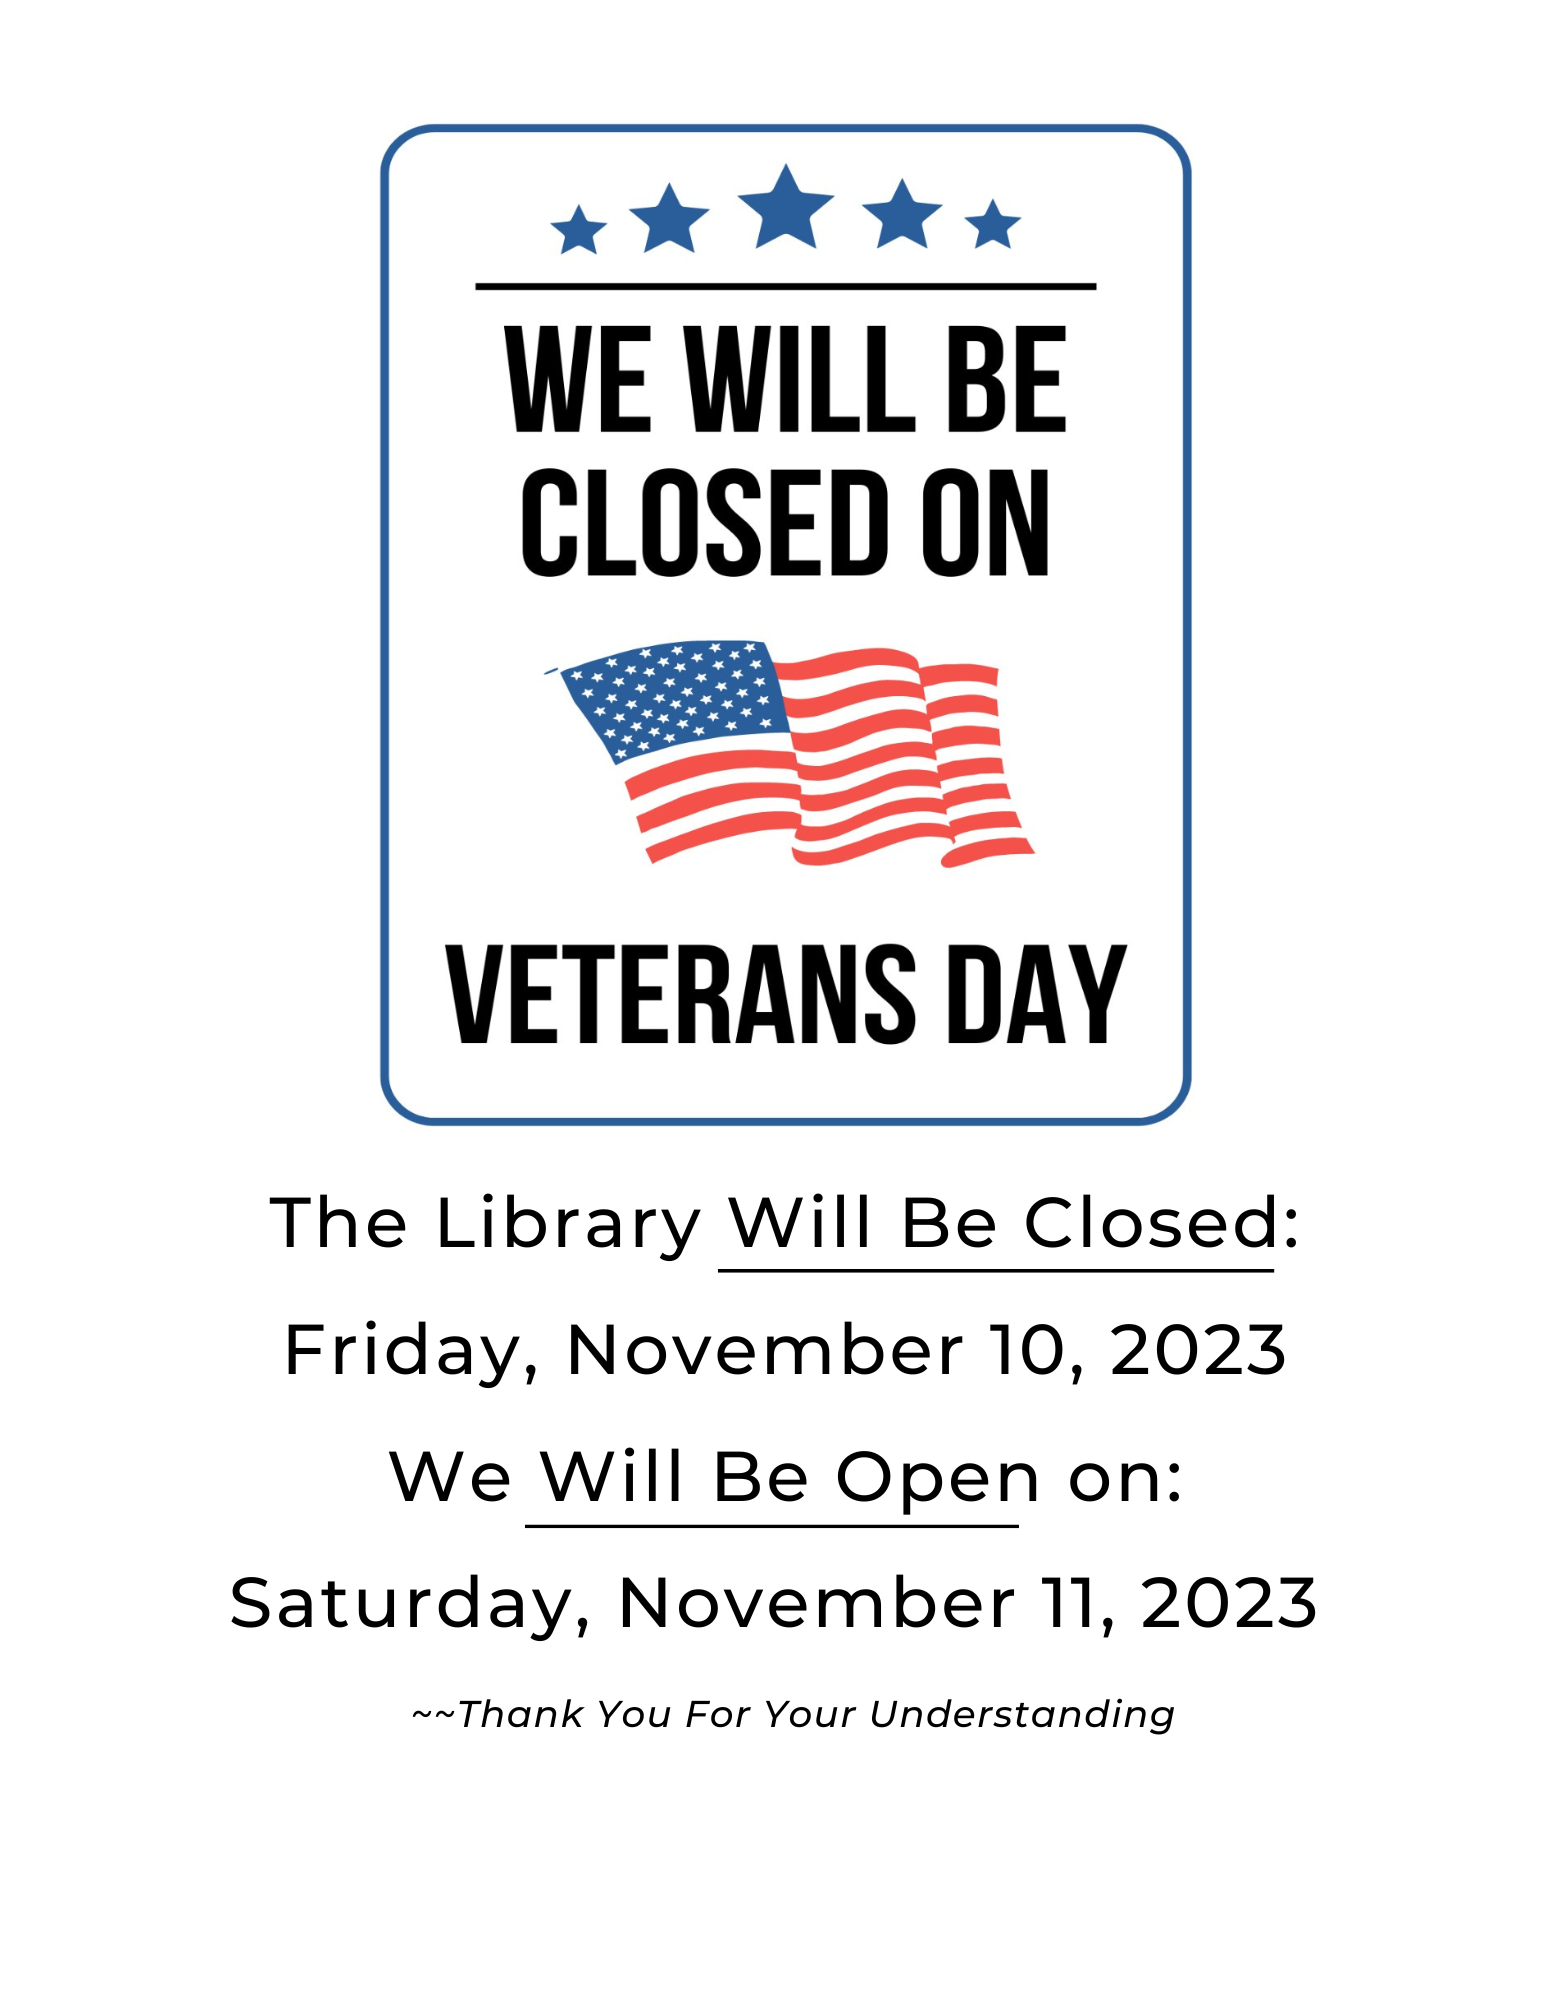 veterans day closure sign.png